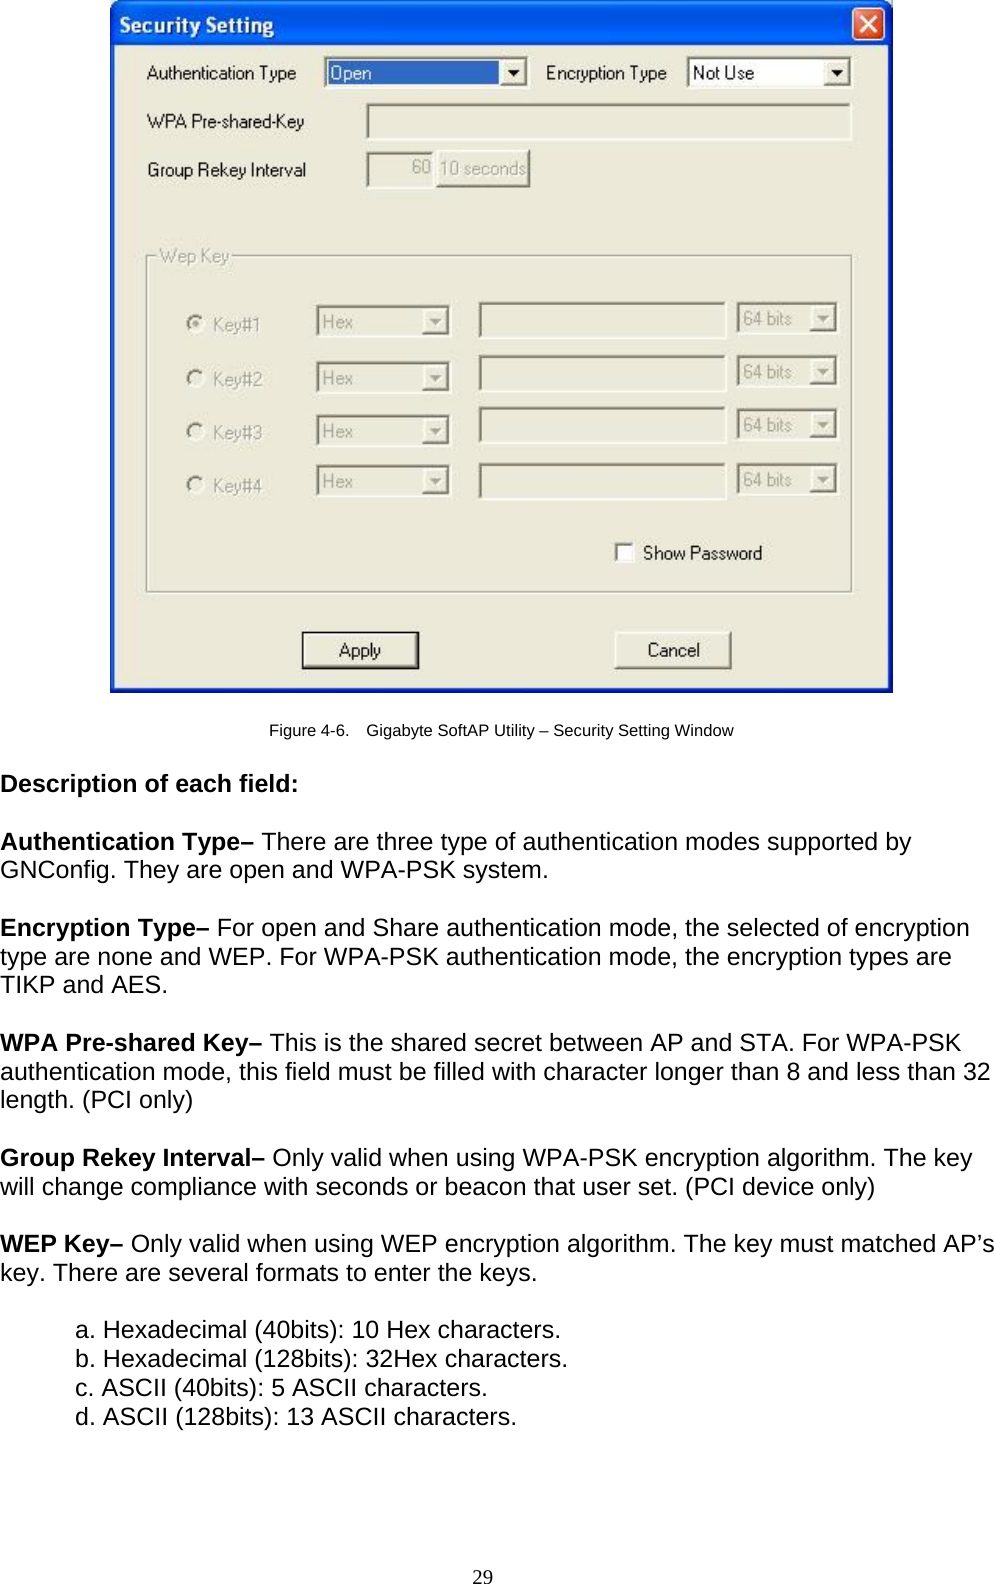   Figure 4-6.    Gigabyte SoftAP Utility – Security Setting Window  Description of each field:  Authentication Type– There are three type of authentication modes supported by GNConfig. They are open and WPA-PSK system.  Encryption Type– For open and Share authentication mode, the selected of encryption type are none and WEP. For WPA-PSK authentication mode, the encryption types are TIKP and AES.  WPA Pre-shared Key– This is the shared secret between AP and STA. For WPA-PSK authentication mode, this field must be filled with character longer than 8 and less than 32 length. (PCI only)  Group Rekey Interval– Only valid when using WPA-PSK encryption algorithm. The key will change compliance with seconds or beacon that user set. (PCI device only)  WEP Key– Only valid when using WEP encryption algorithm. The key must matched AP’s key. There are several formats to enter the keys.  a. Hexadecimal (40bits): 10 Hex characters. b. Hexadecimal (128bits): 32Hex characters. c. ASCII (40bits): 5 ASCII characters. d. ASCII (128bits): 13 ASCII characters.    29   